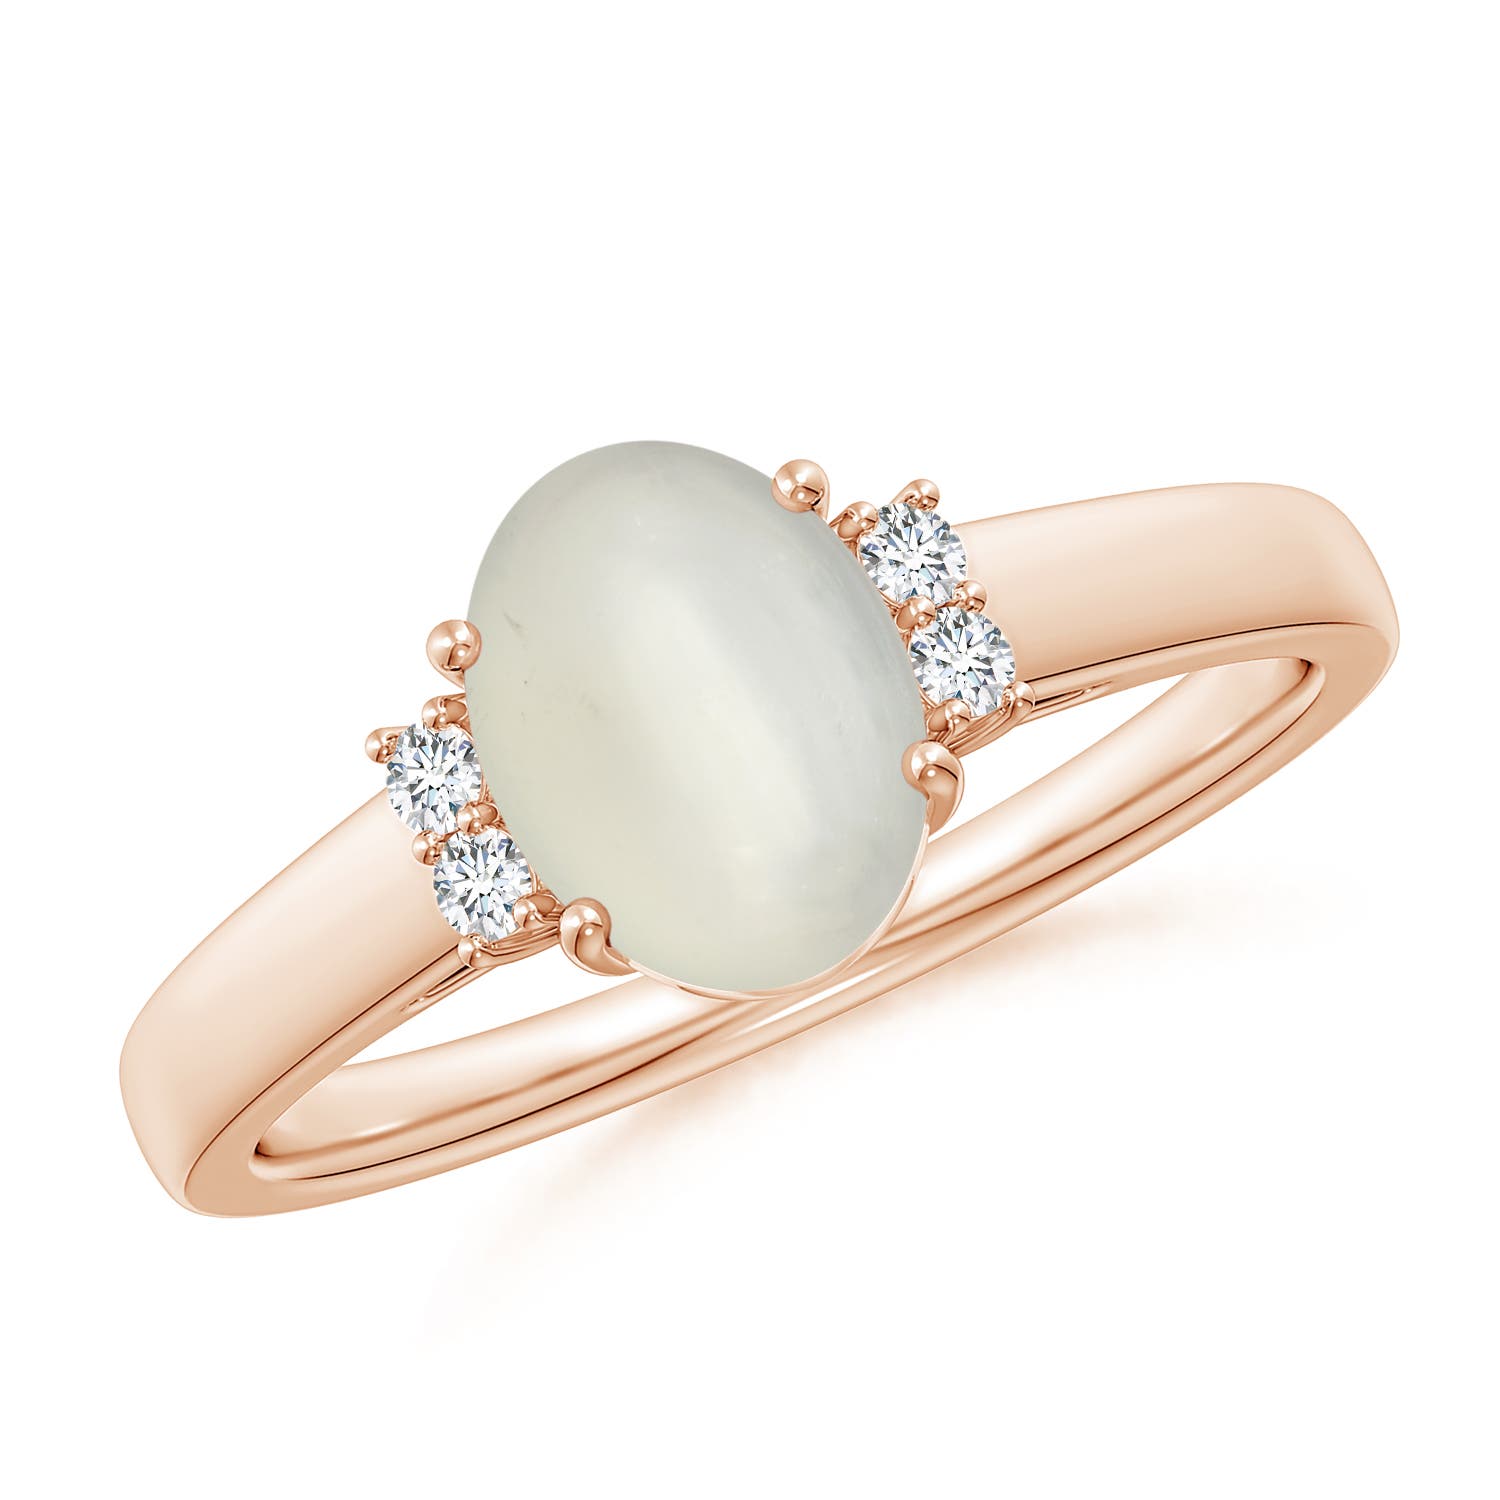 AAA - Moonstone / 1.17 CT / 14 KT Rose Gold